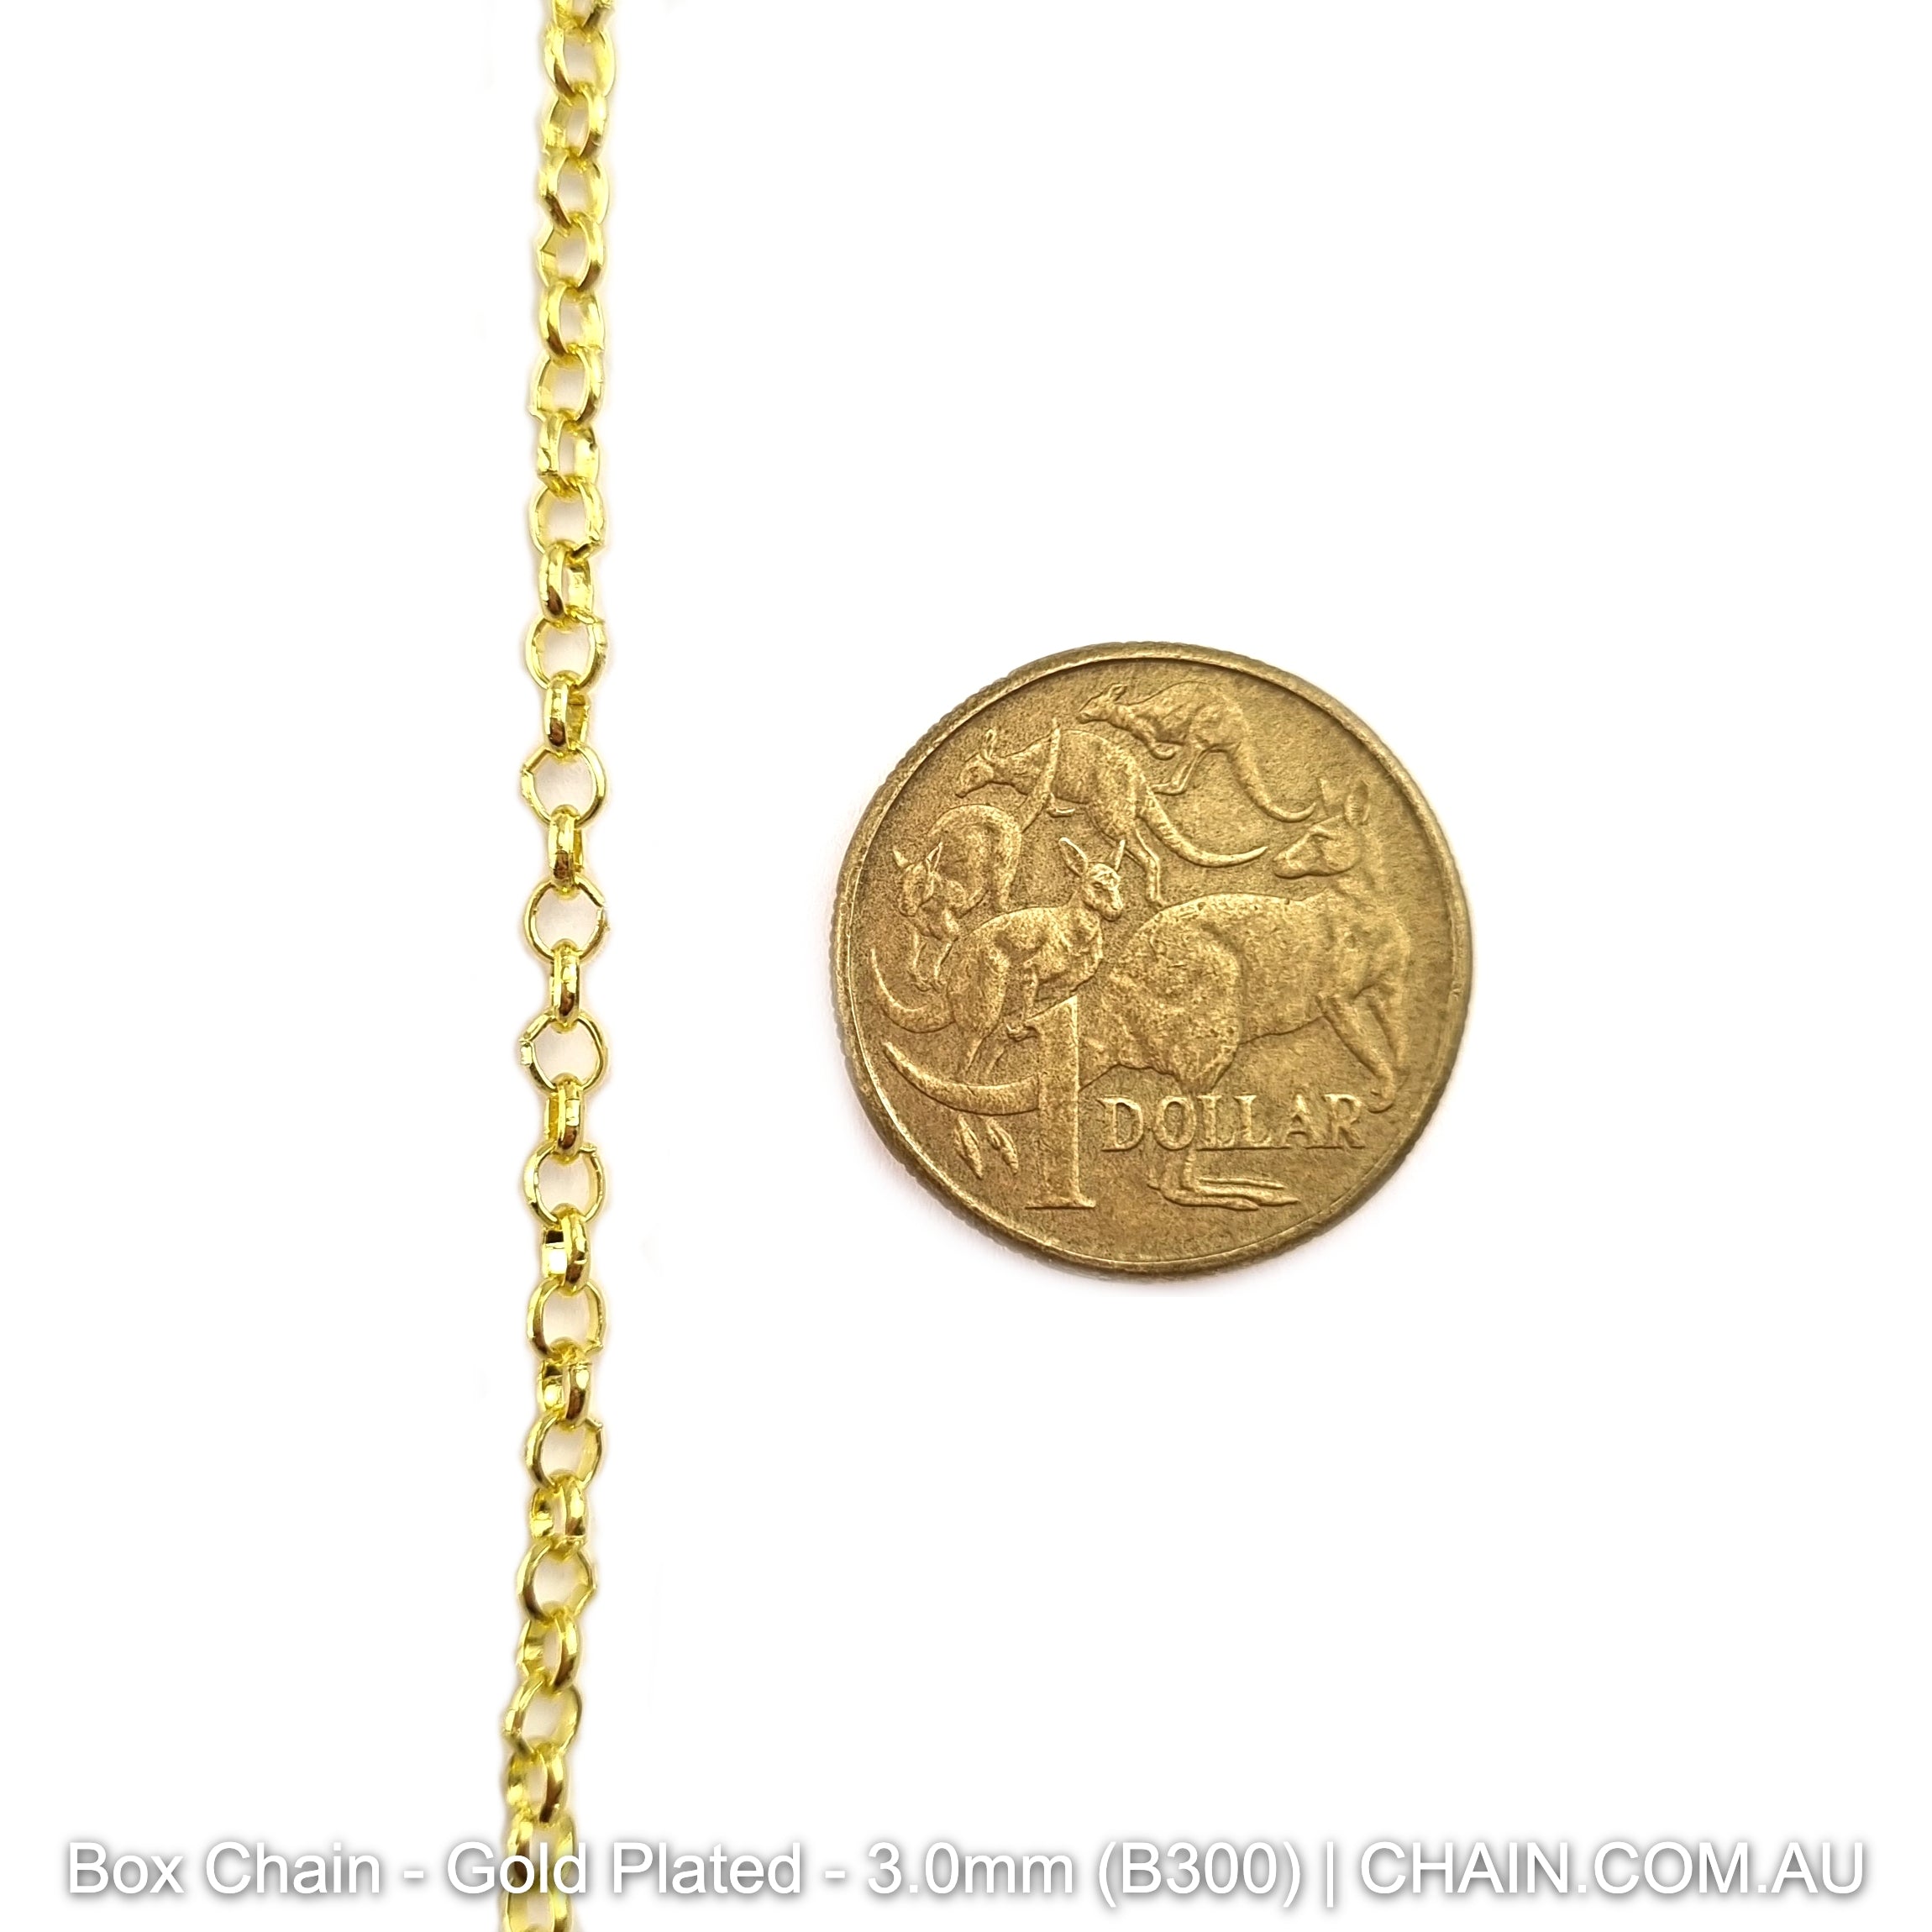 Box Jewellery Chain Gold Plated. Size: 3.0mm x 25m Reel. Shop Jewellery Chain online. Australia wide shipping. Chain.com.au